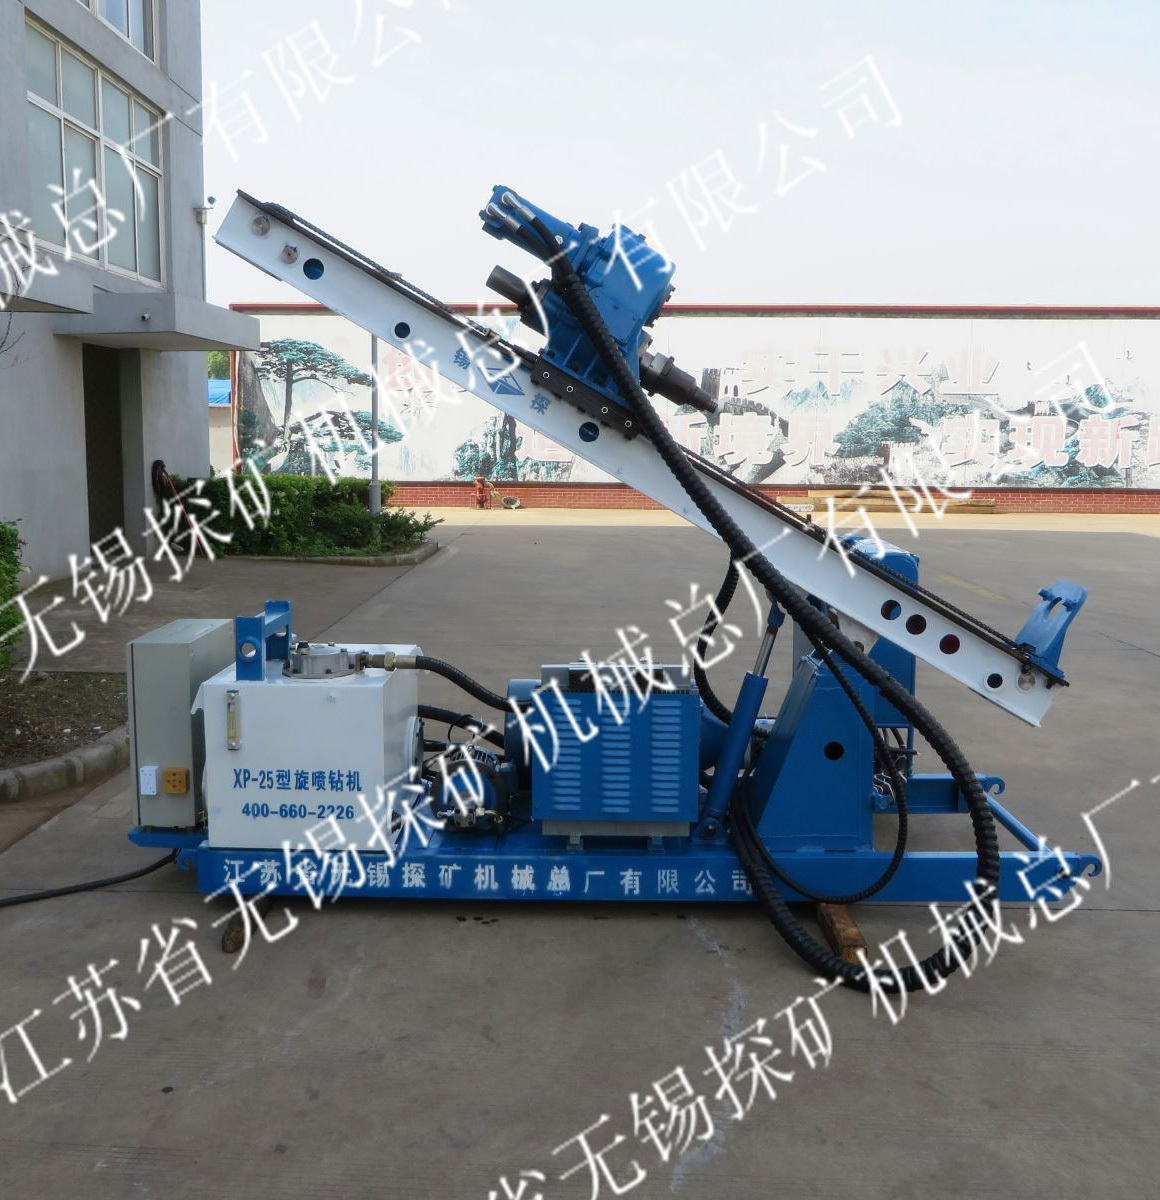 XP-25 Jet grouting drilling rig